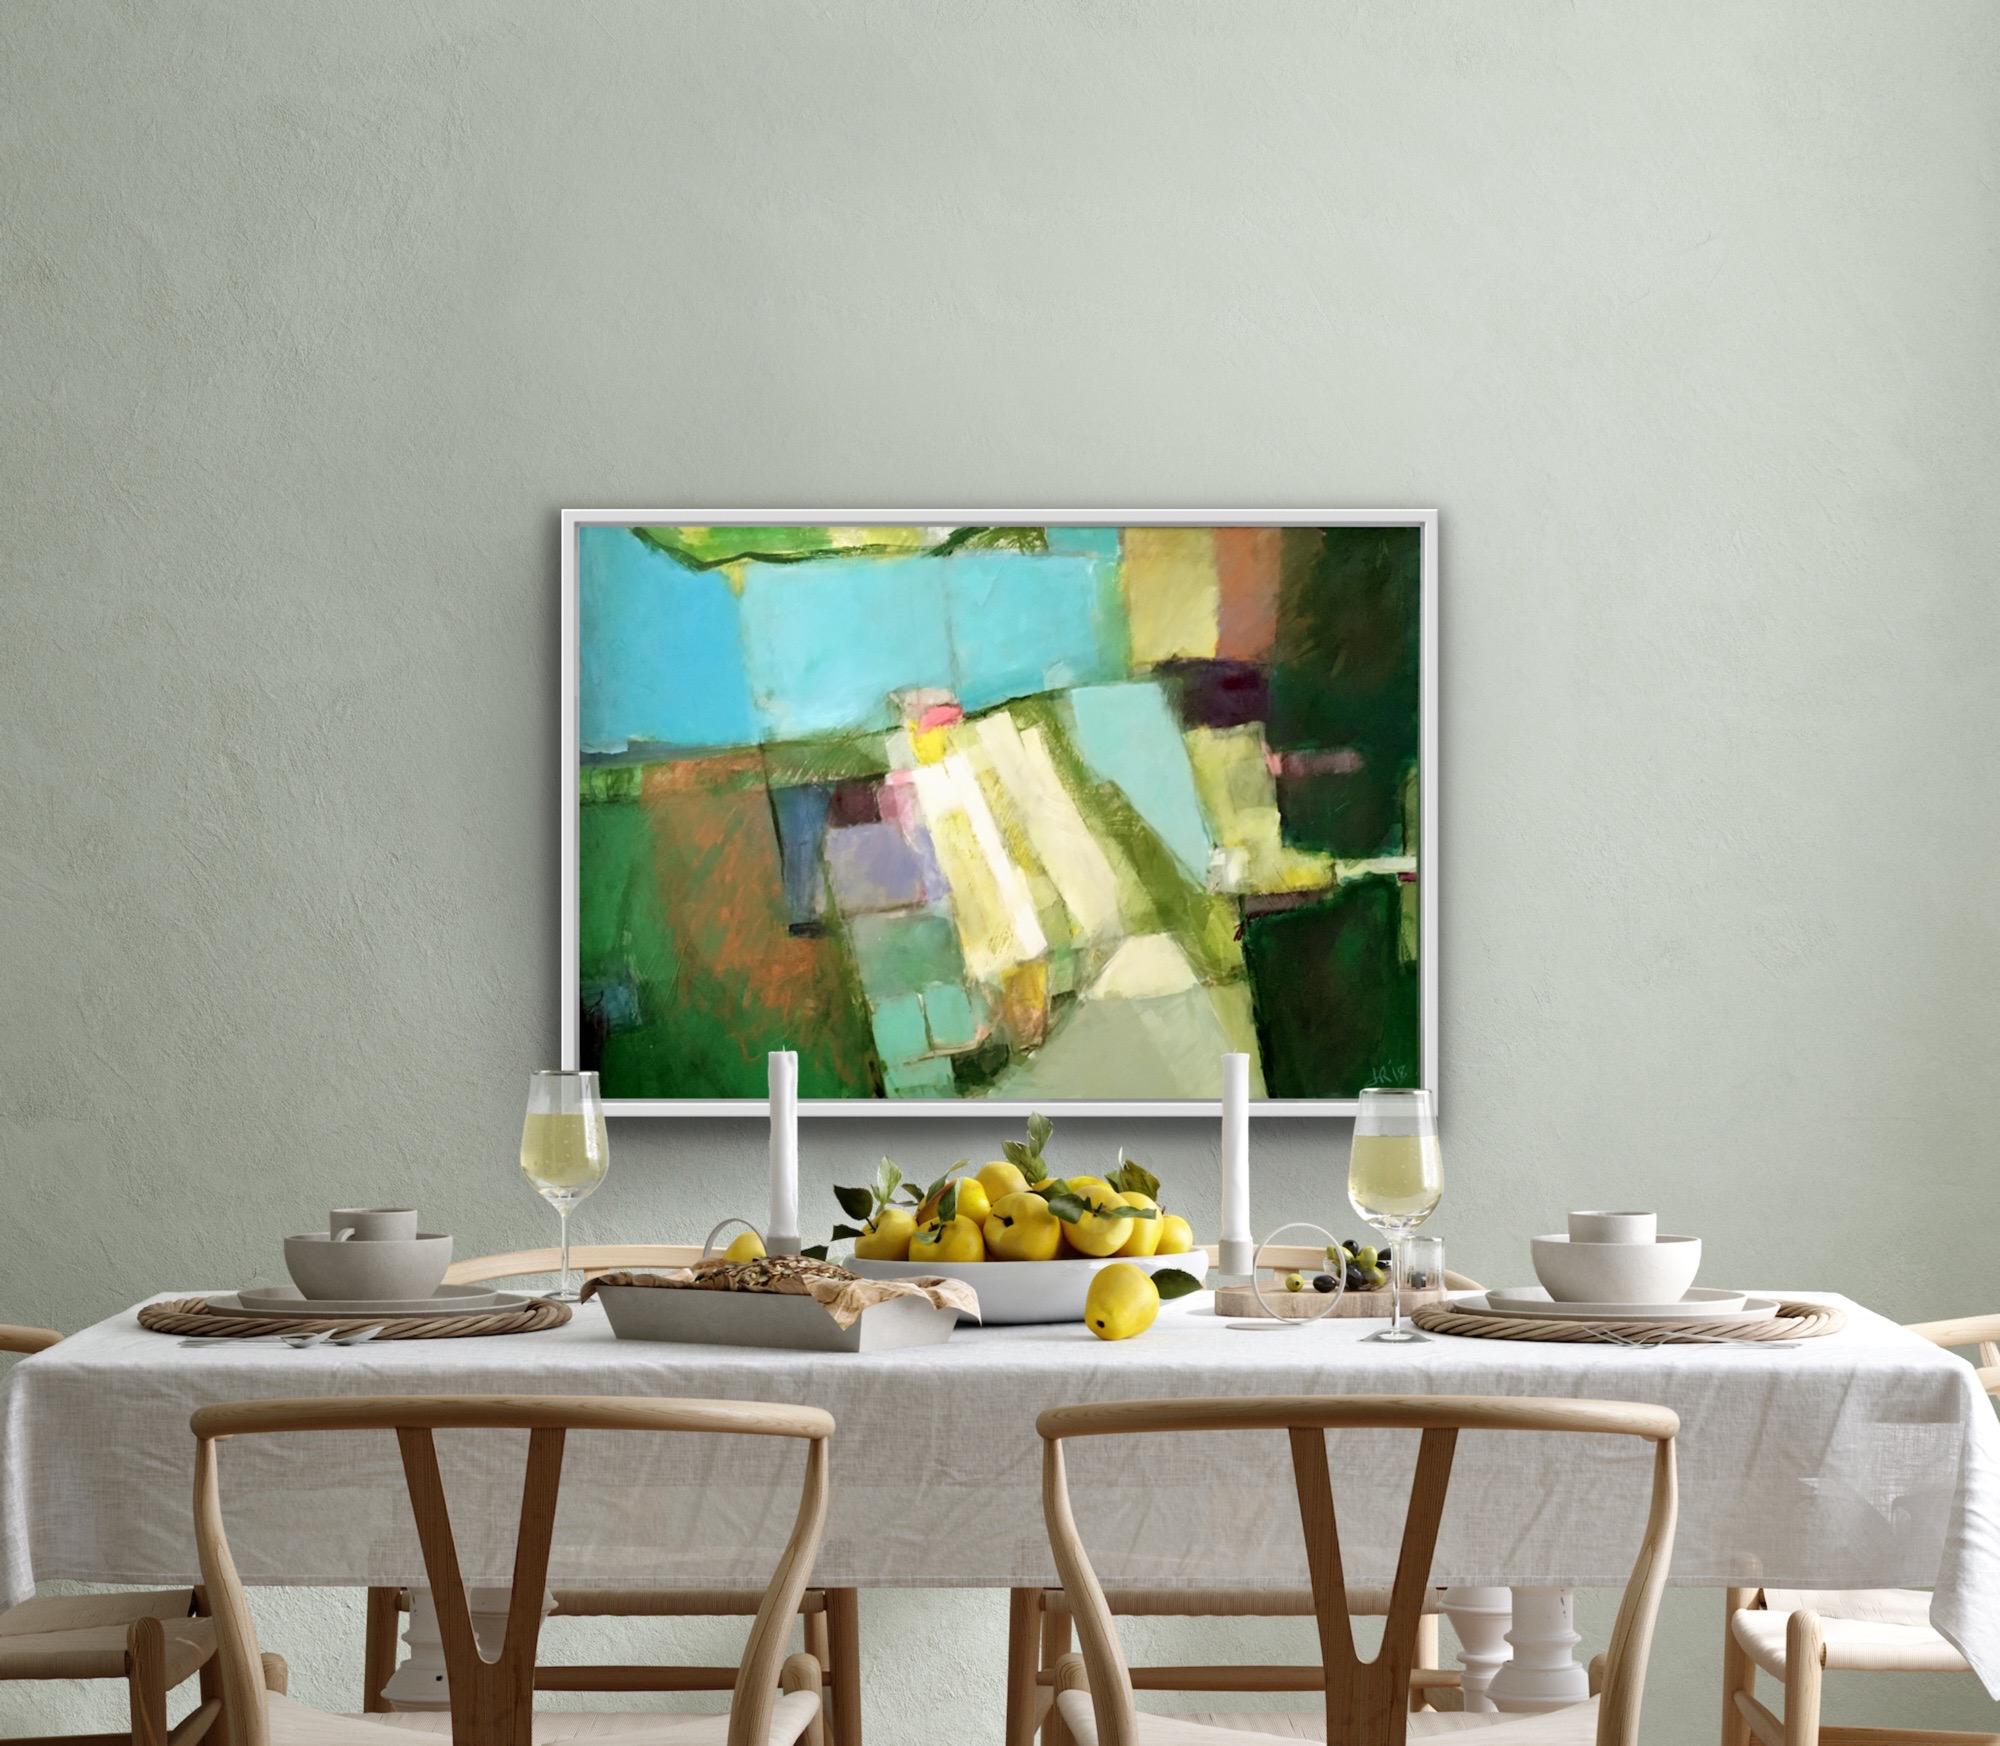 Paxos - Unititled Green by Jon Rowland, original, abstract, landscape  - Painting by Jon Rowland 